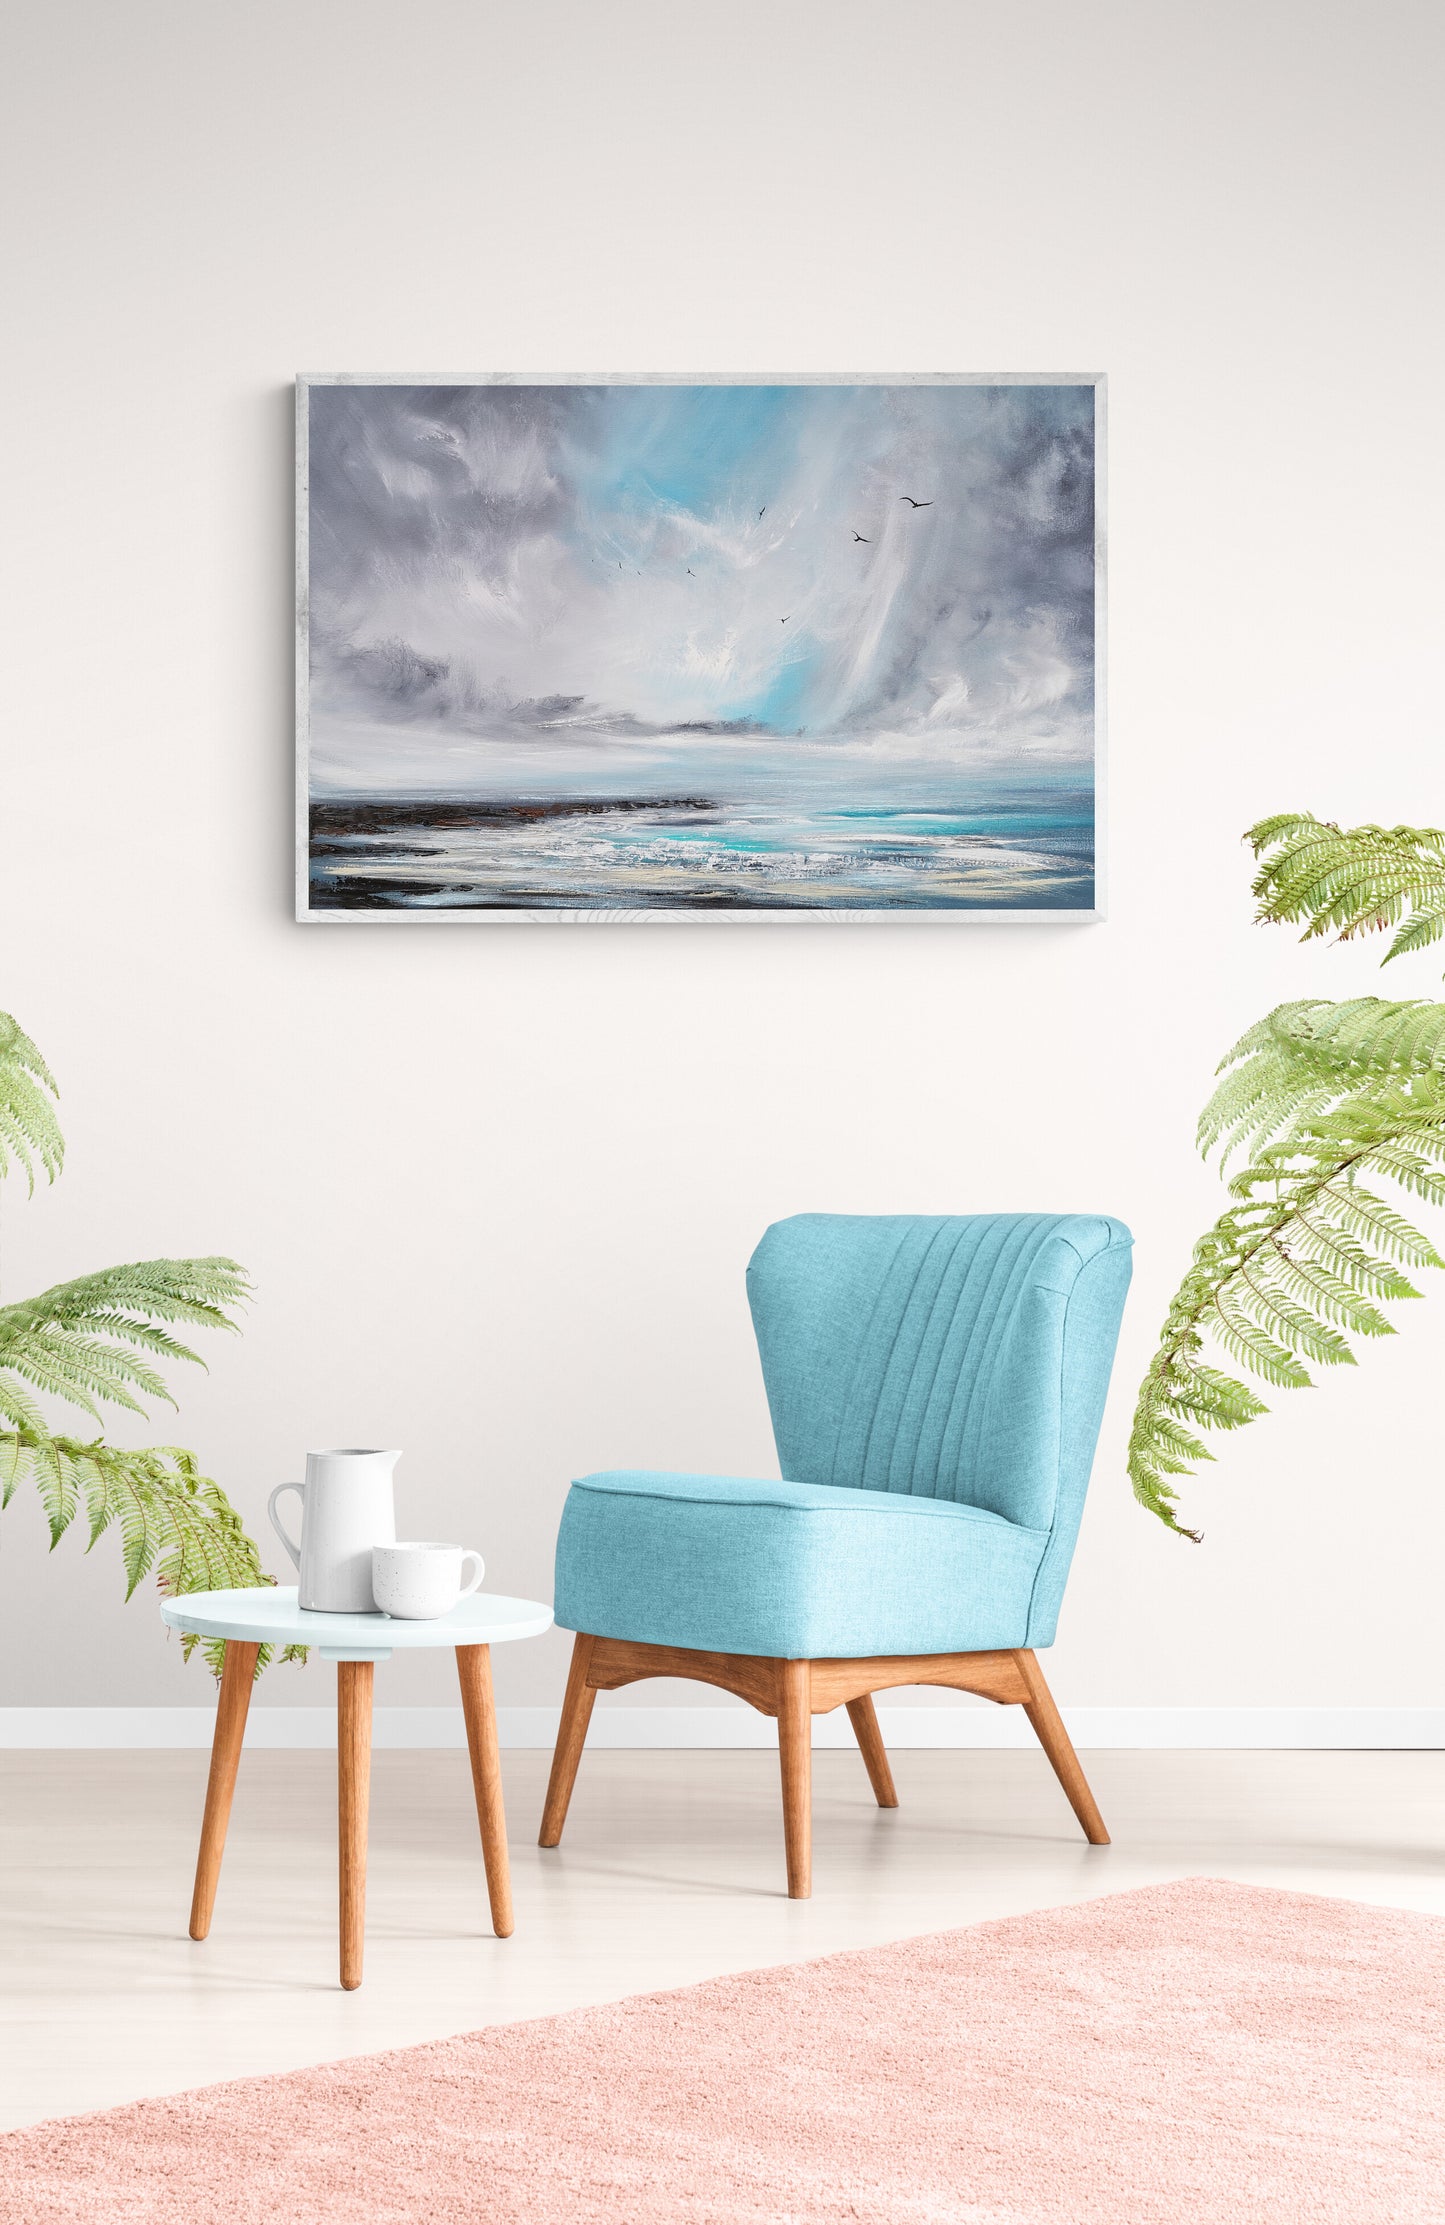 The Passing Storm, 90x60cm, Large, panoramic, emotional art, seascapes